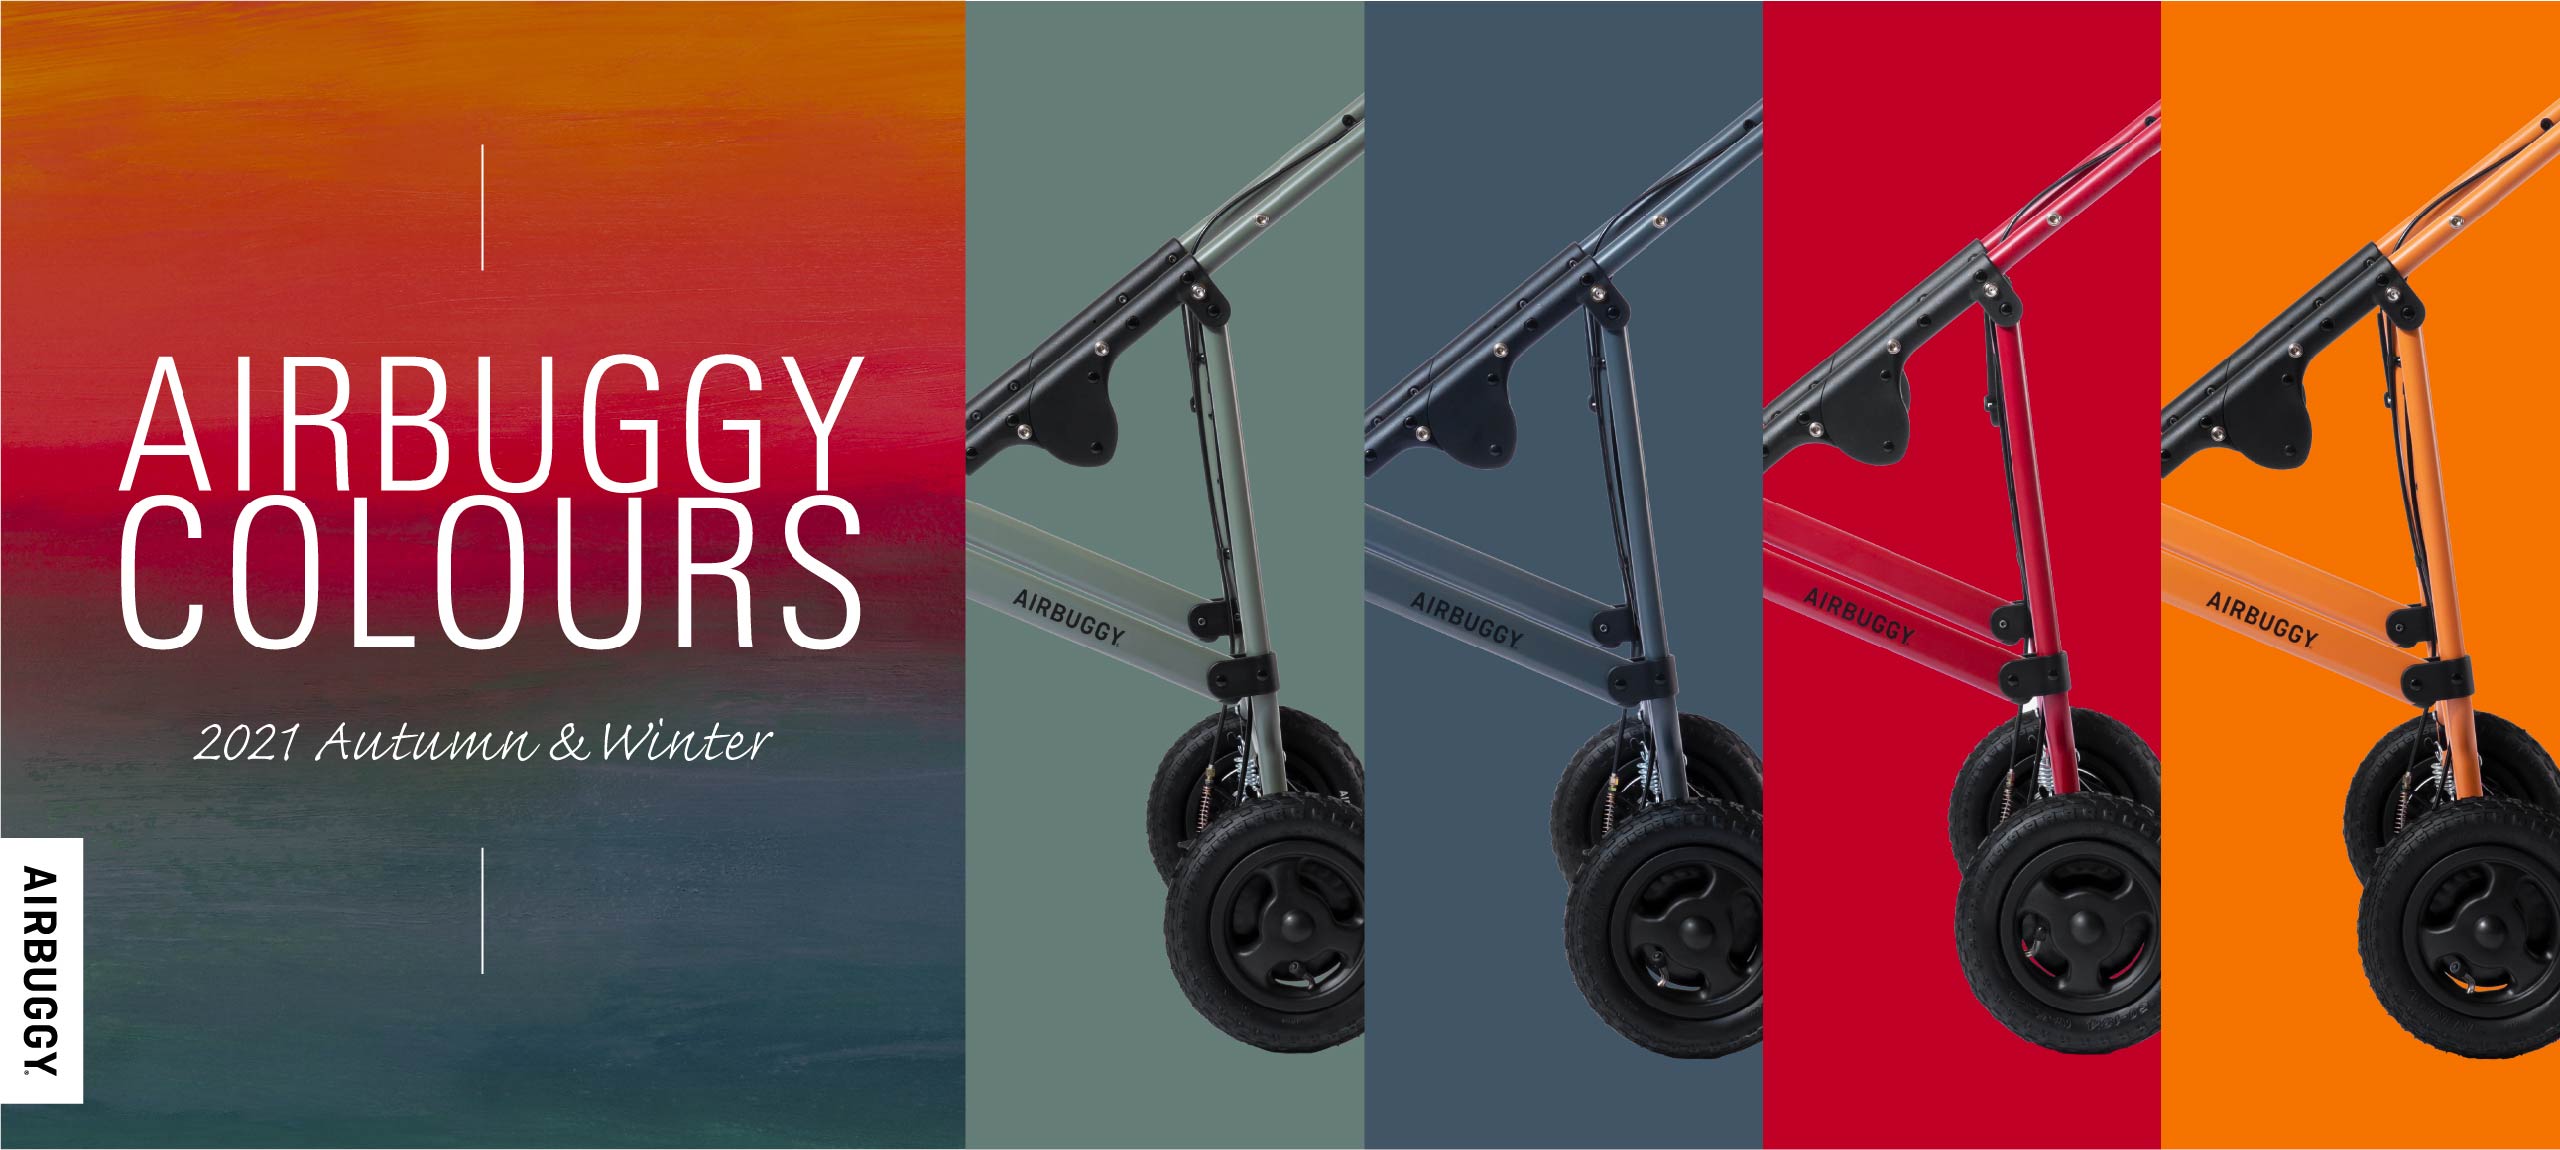 AIRBUGGY COLOURS 2021 Autumn & Winter